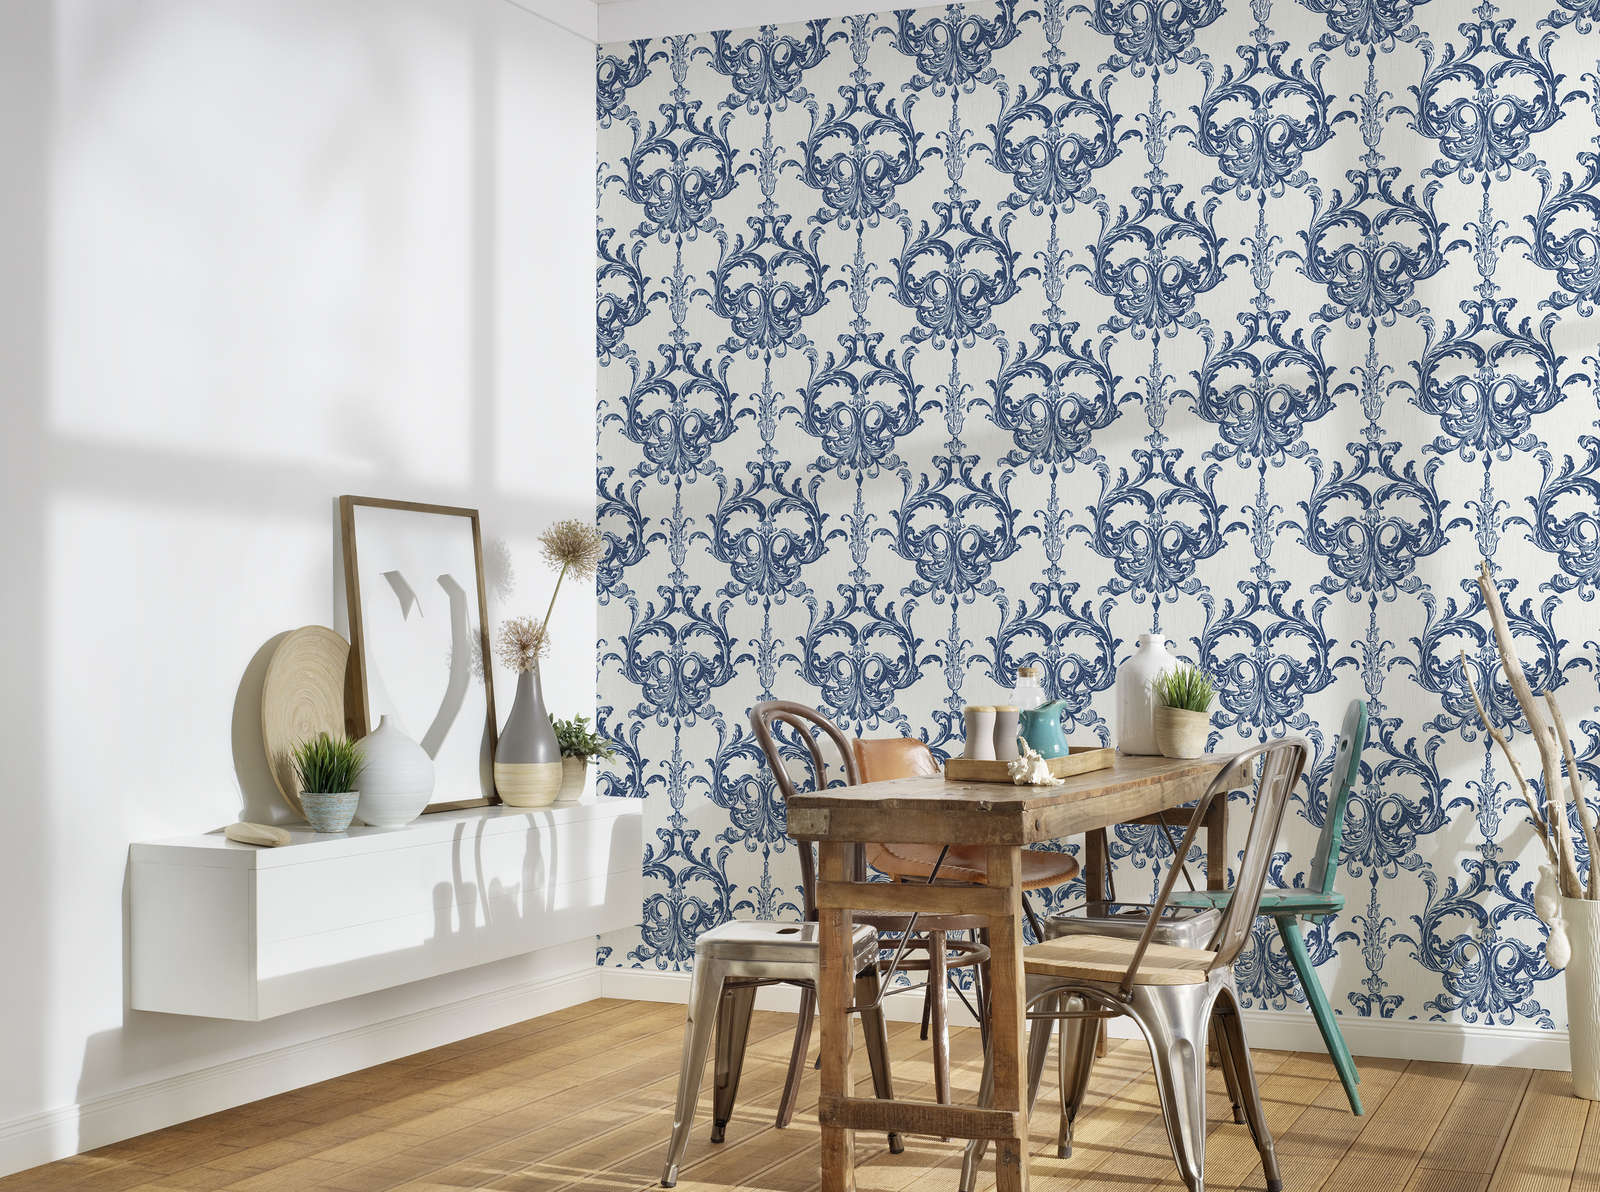             Ornament wallpaper with climbing pattern - blue, white
        